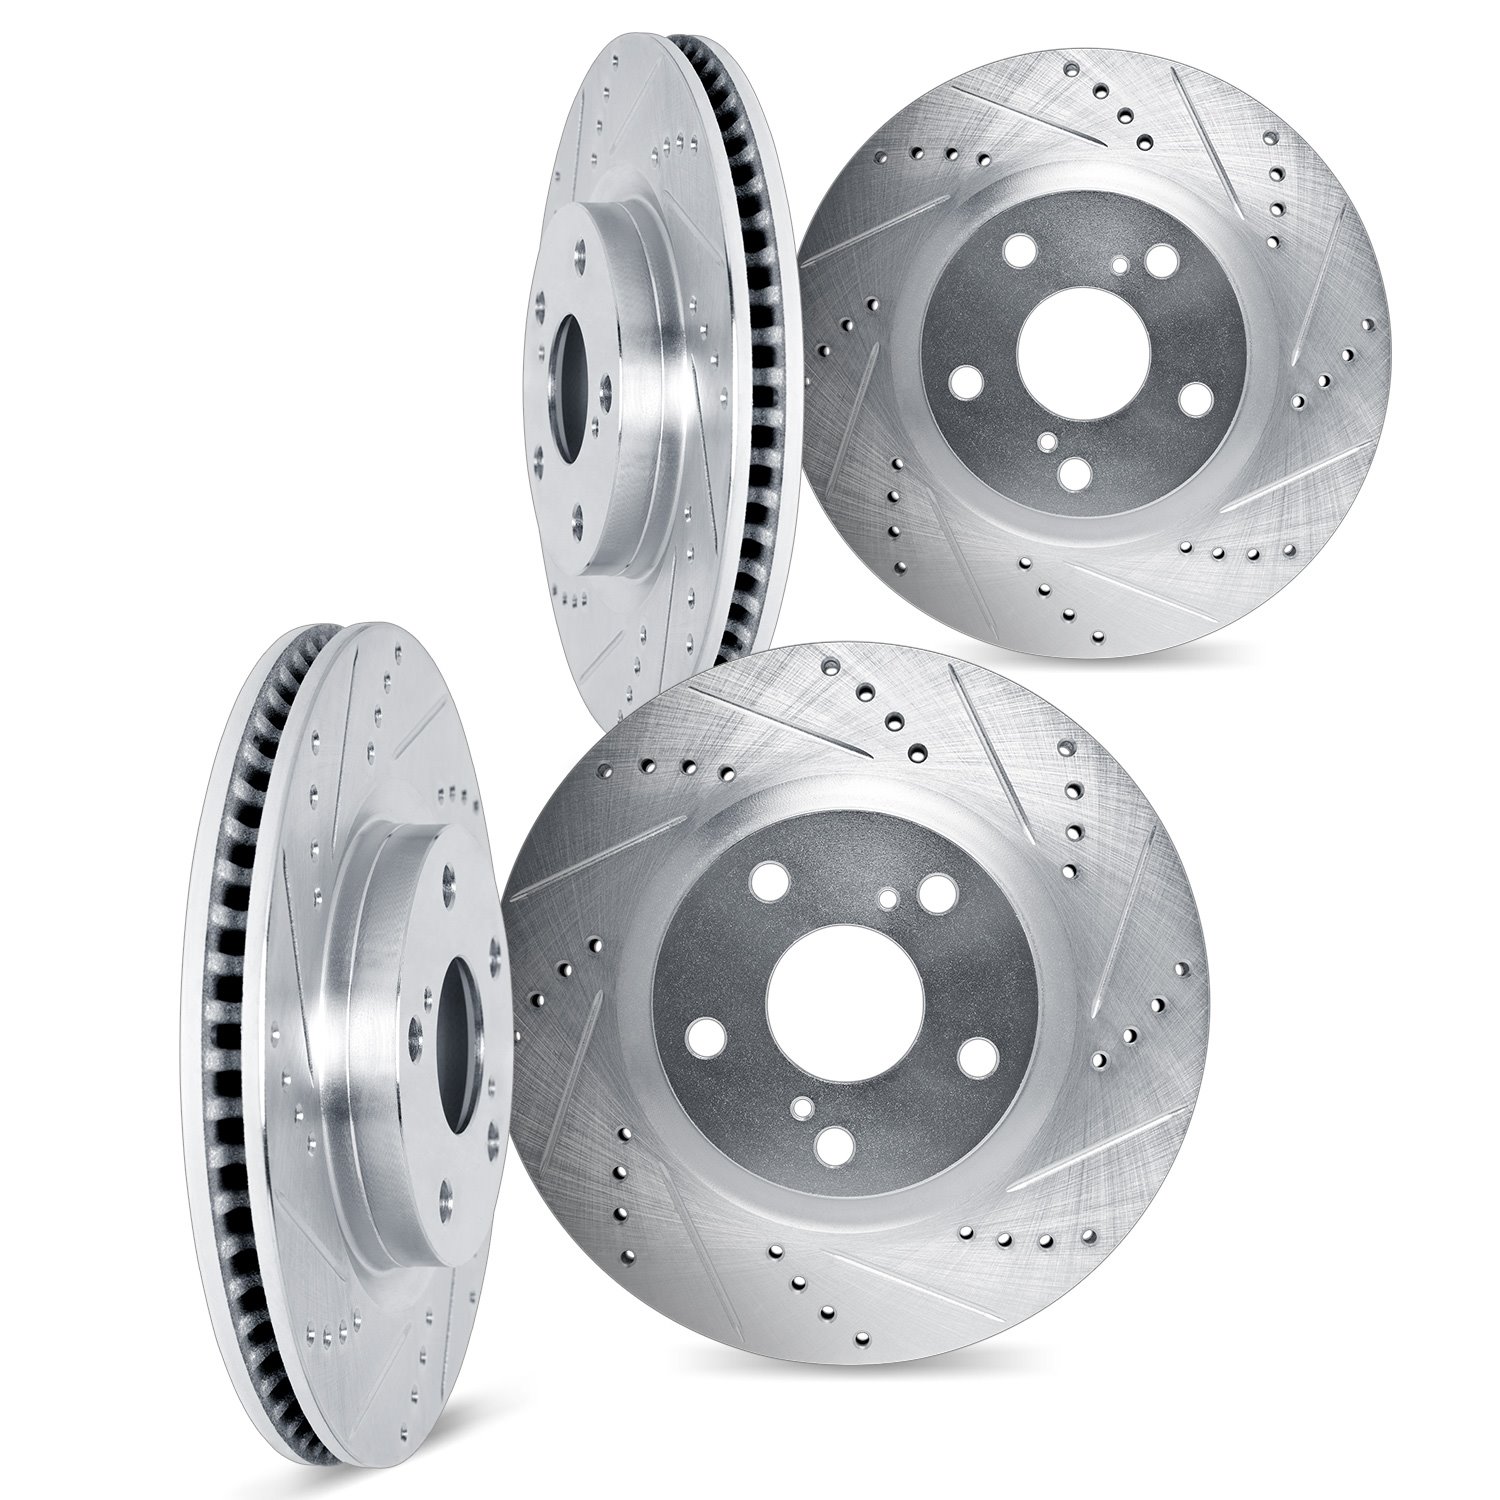 7004-67085 Drilled/Slotted Brake Rotors [Silver], Fits Select Infiniti/Nissan, Position: Front and Rear